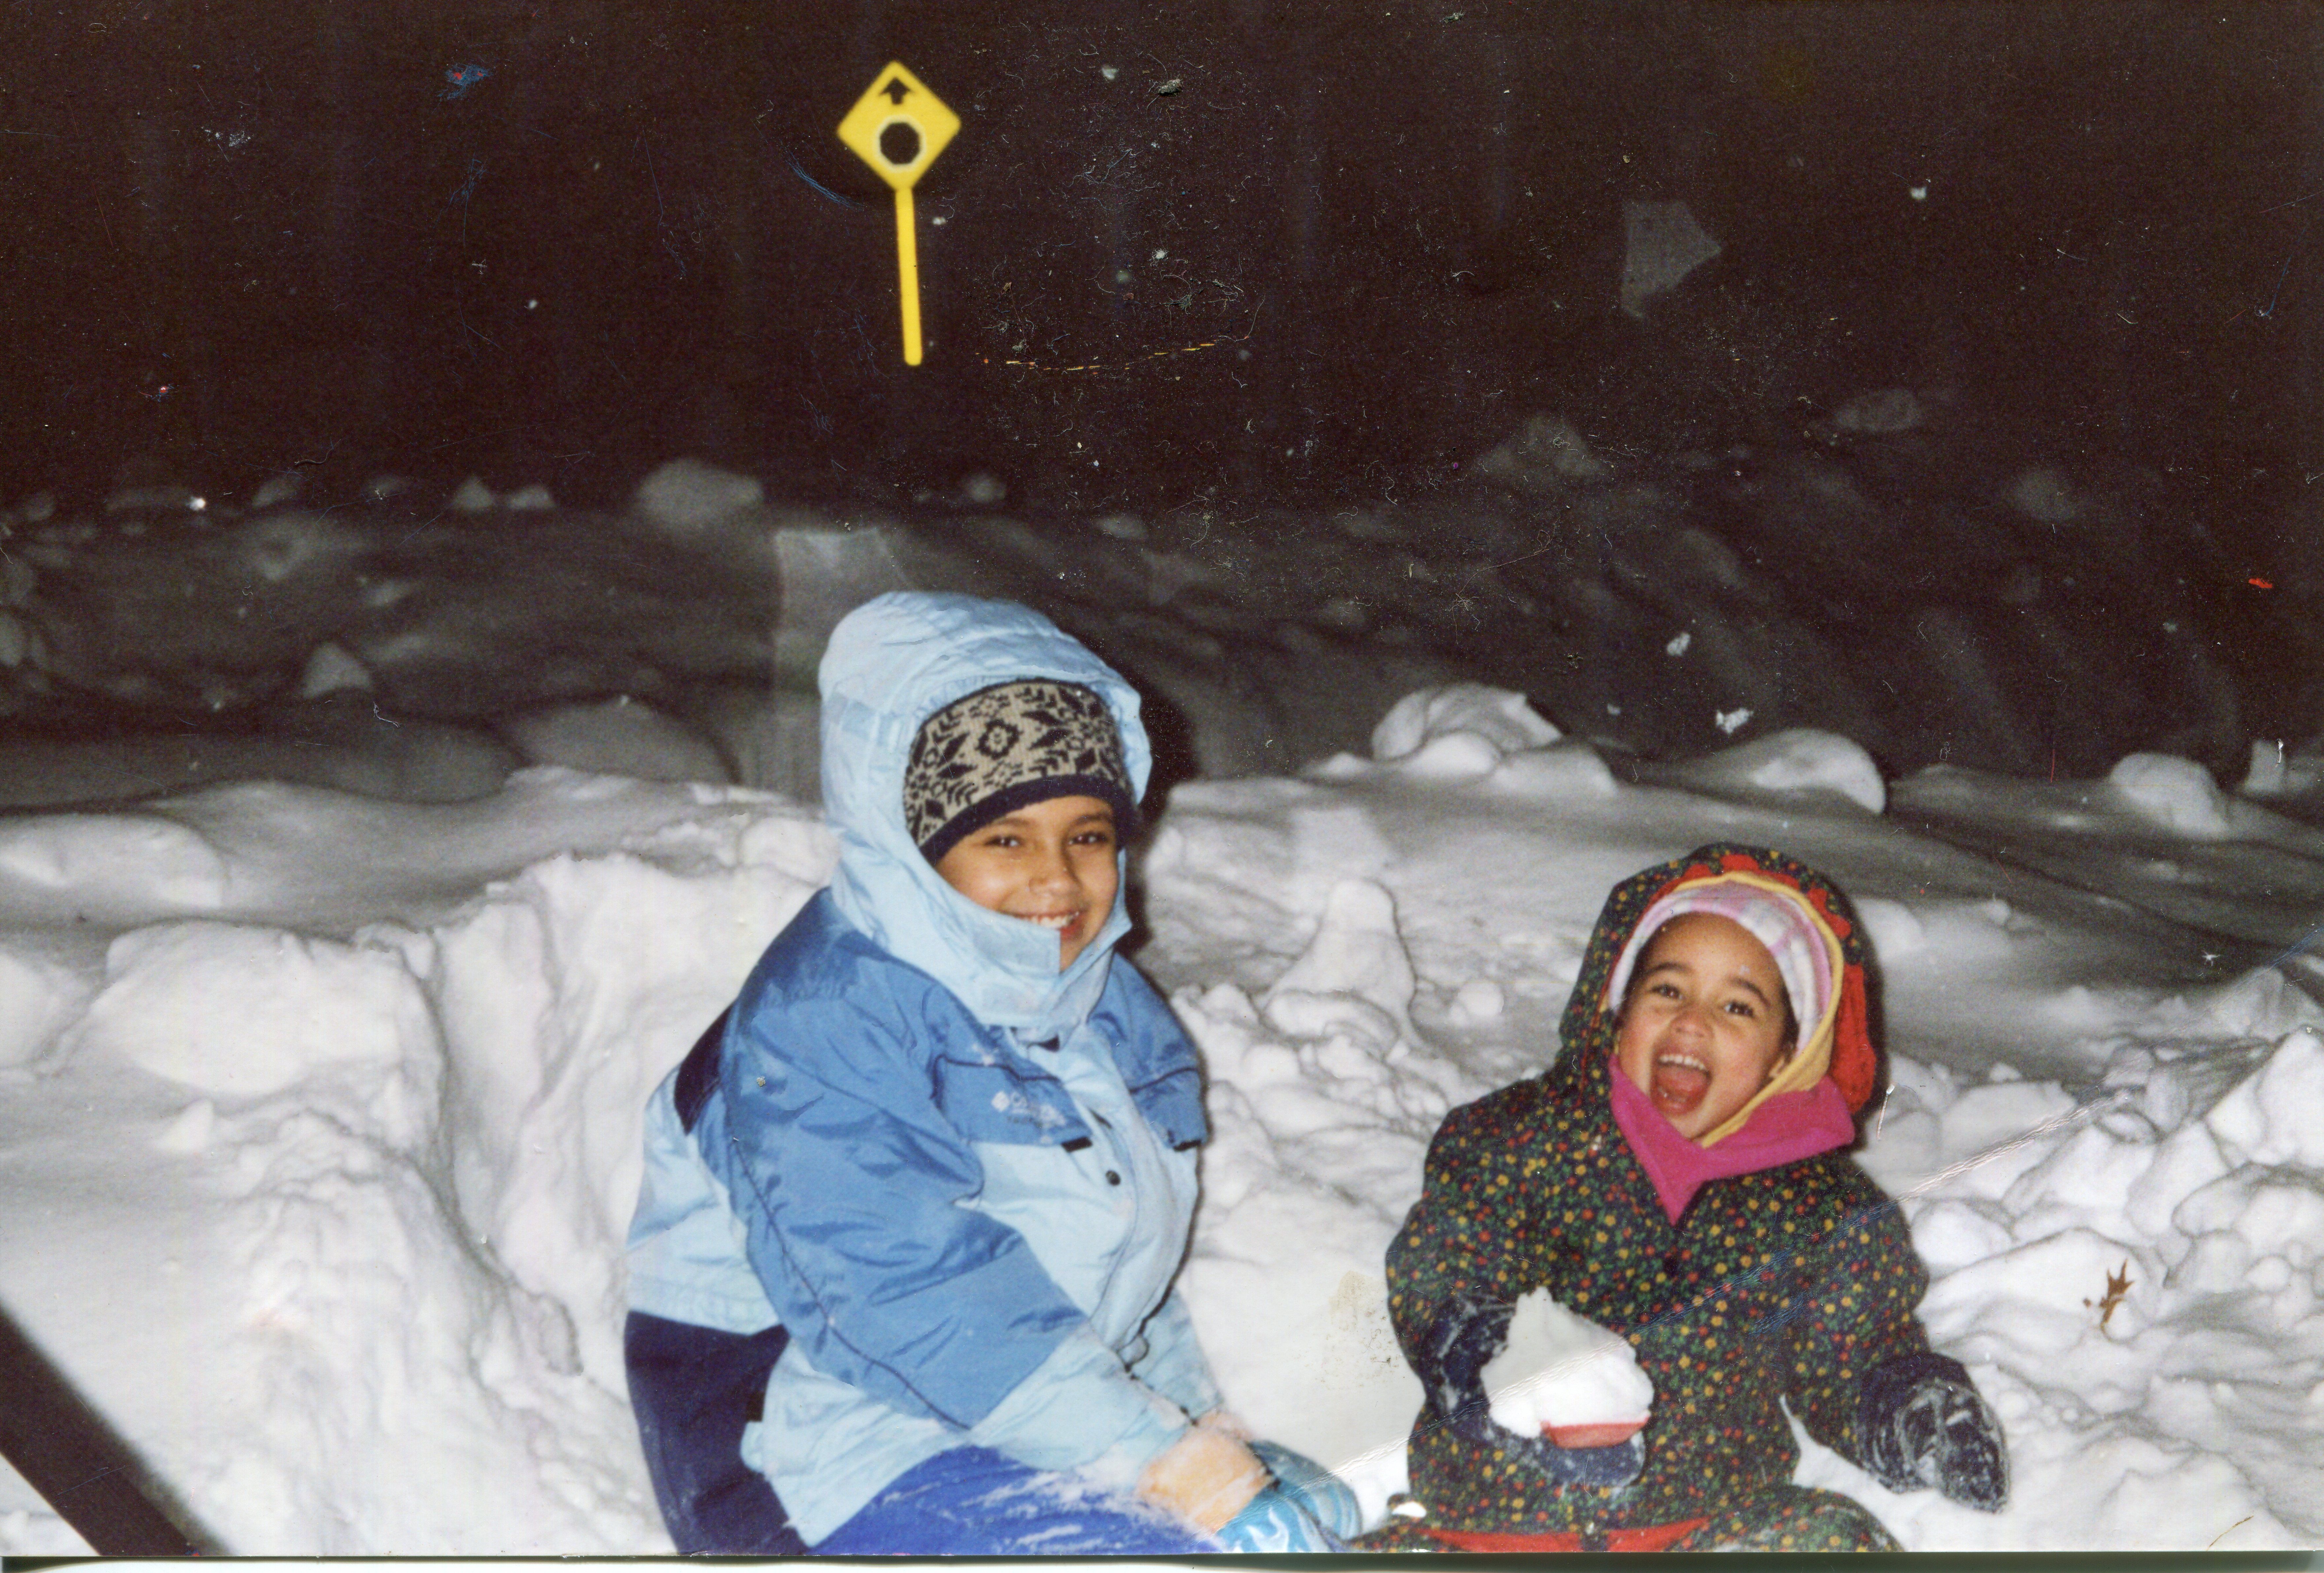  Aly and I playing in the snow in Maplewood. My mom used to take us outside at night whenever there were big snows. Early 2000s